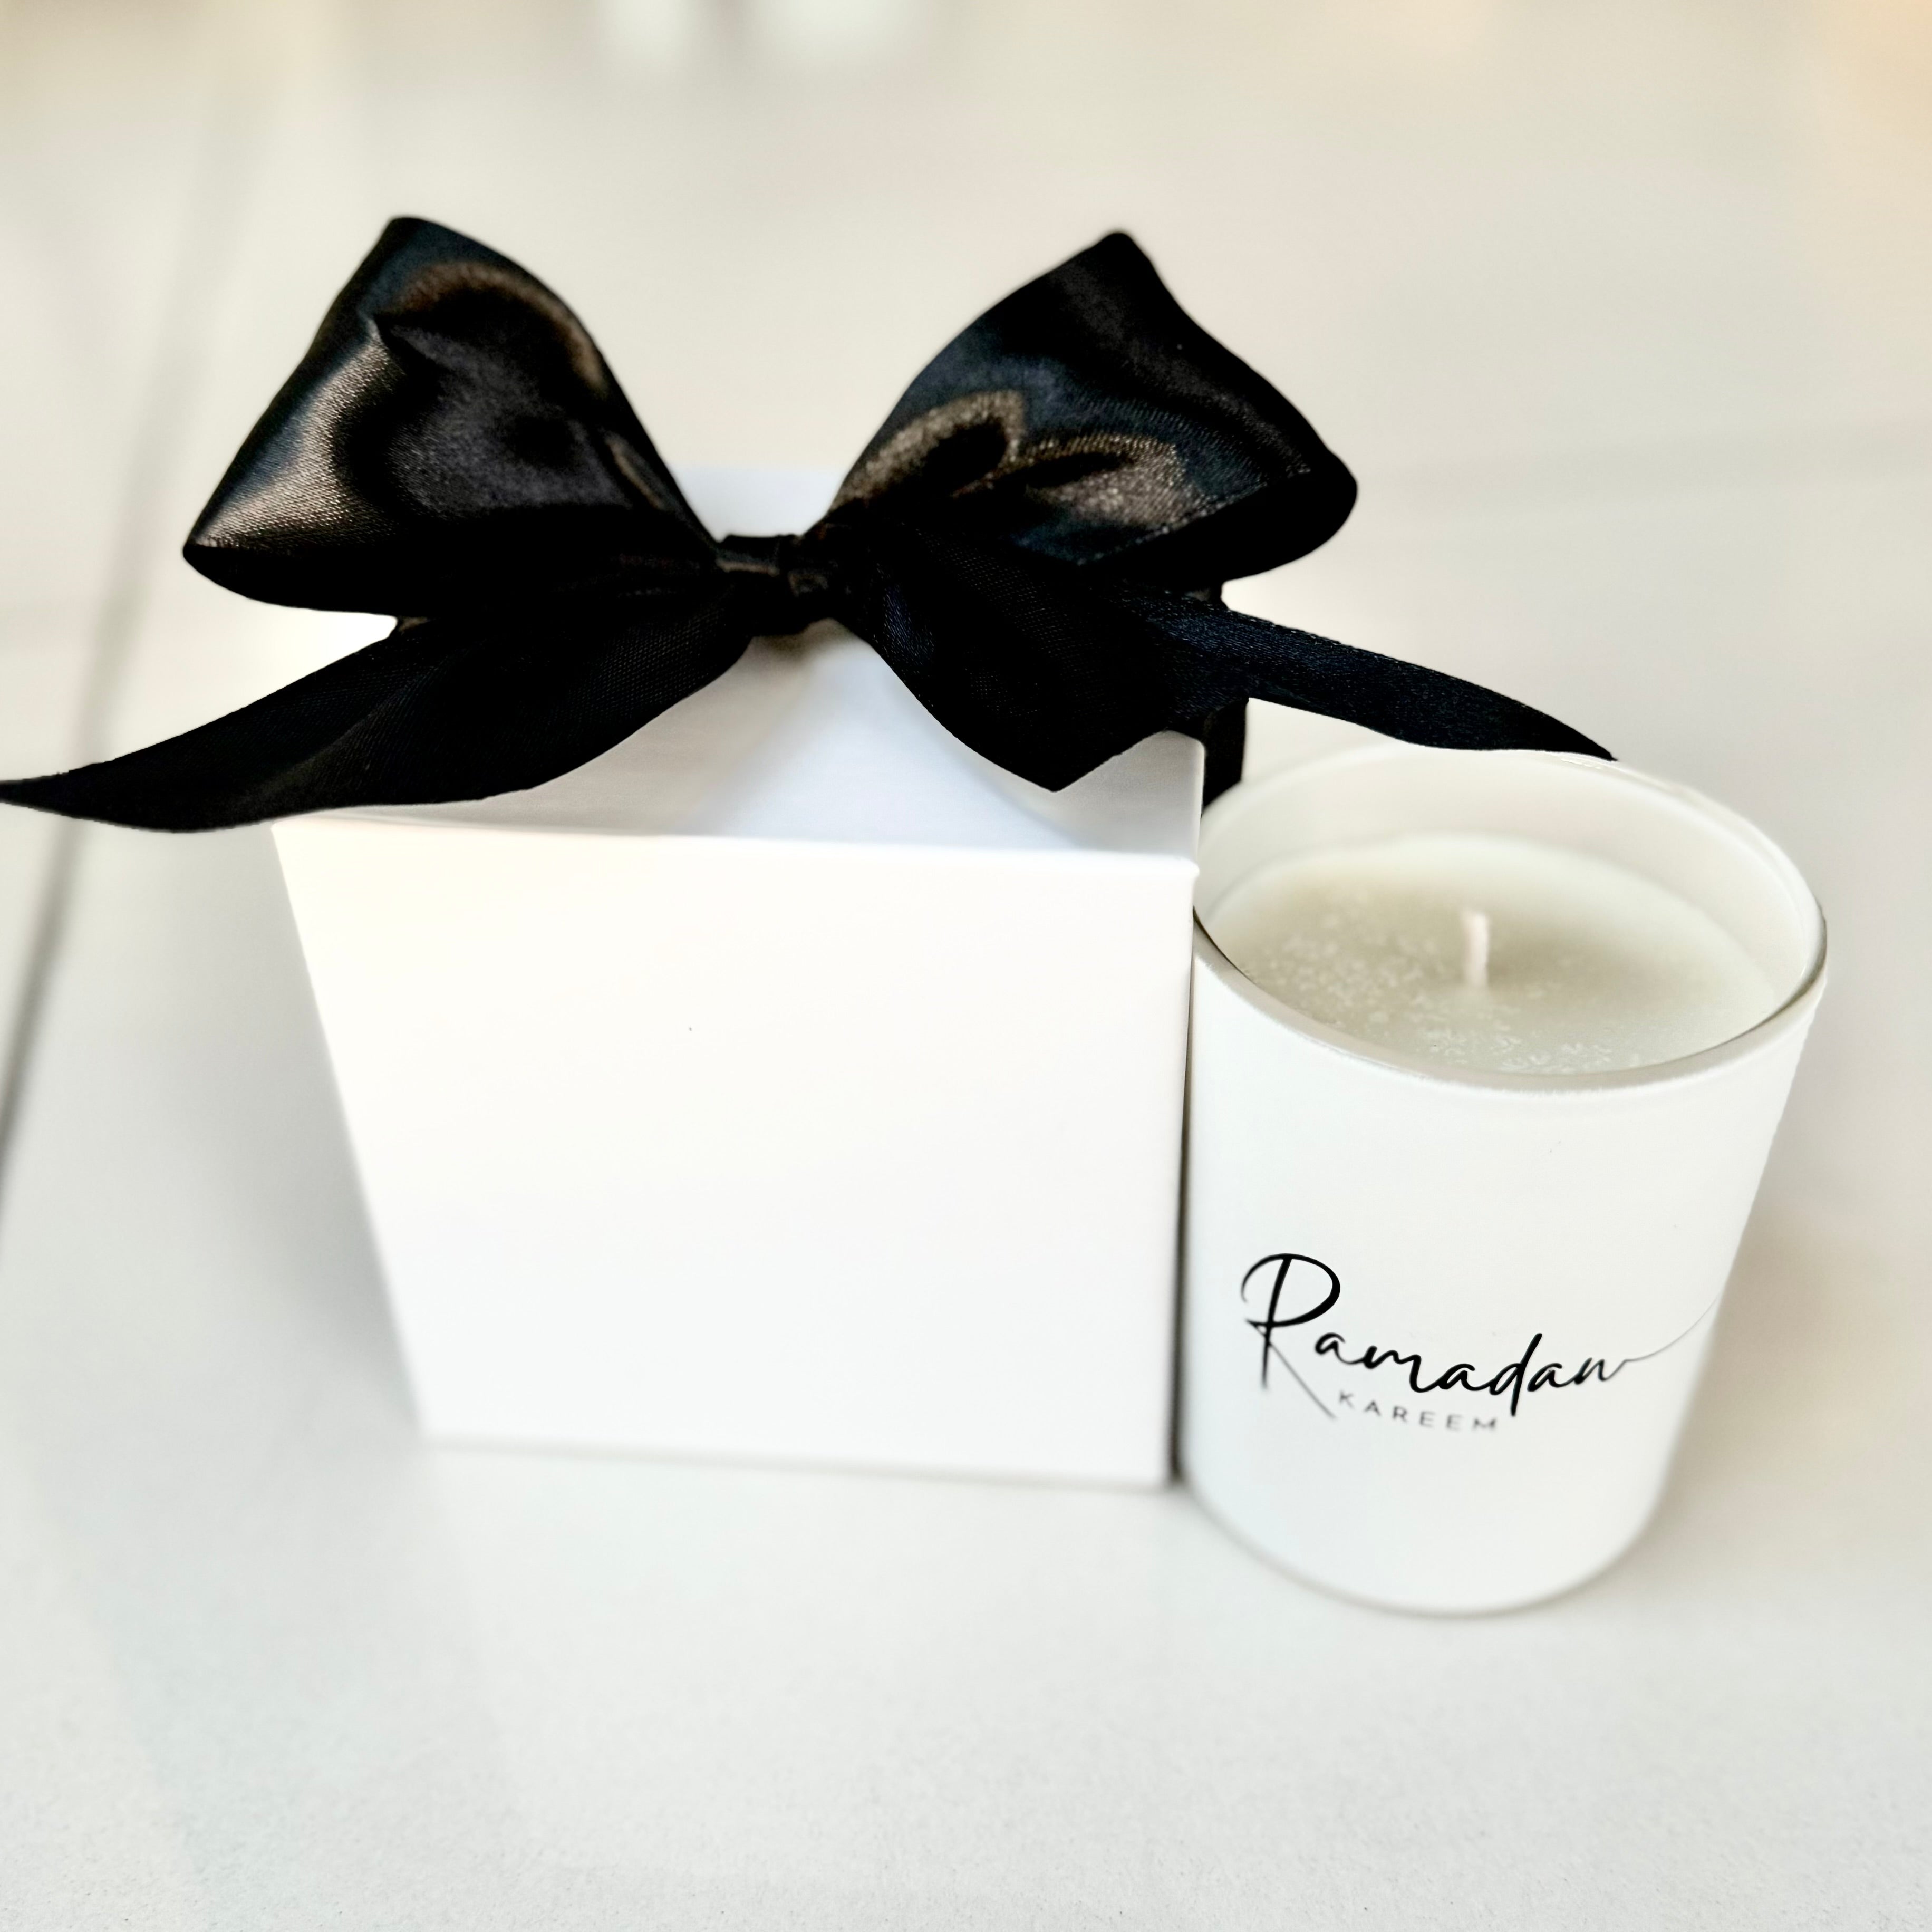 „The Ninth Month" Luxury Candle in personalized gift box